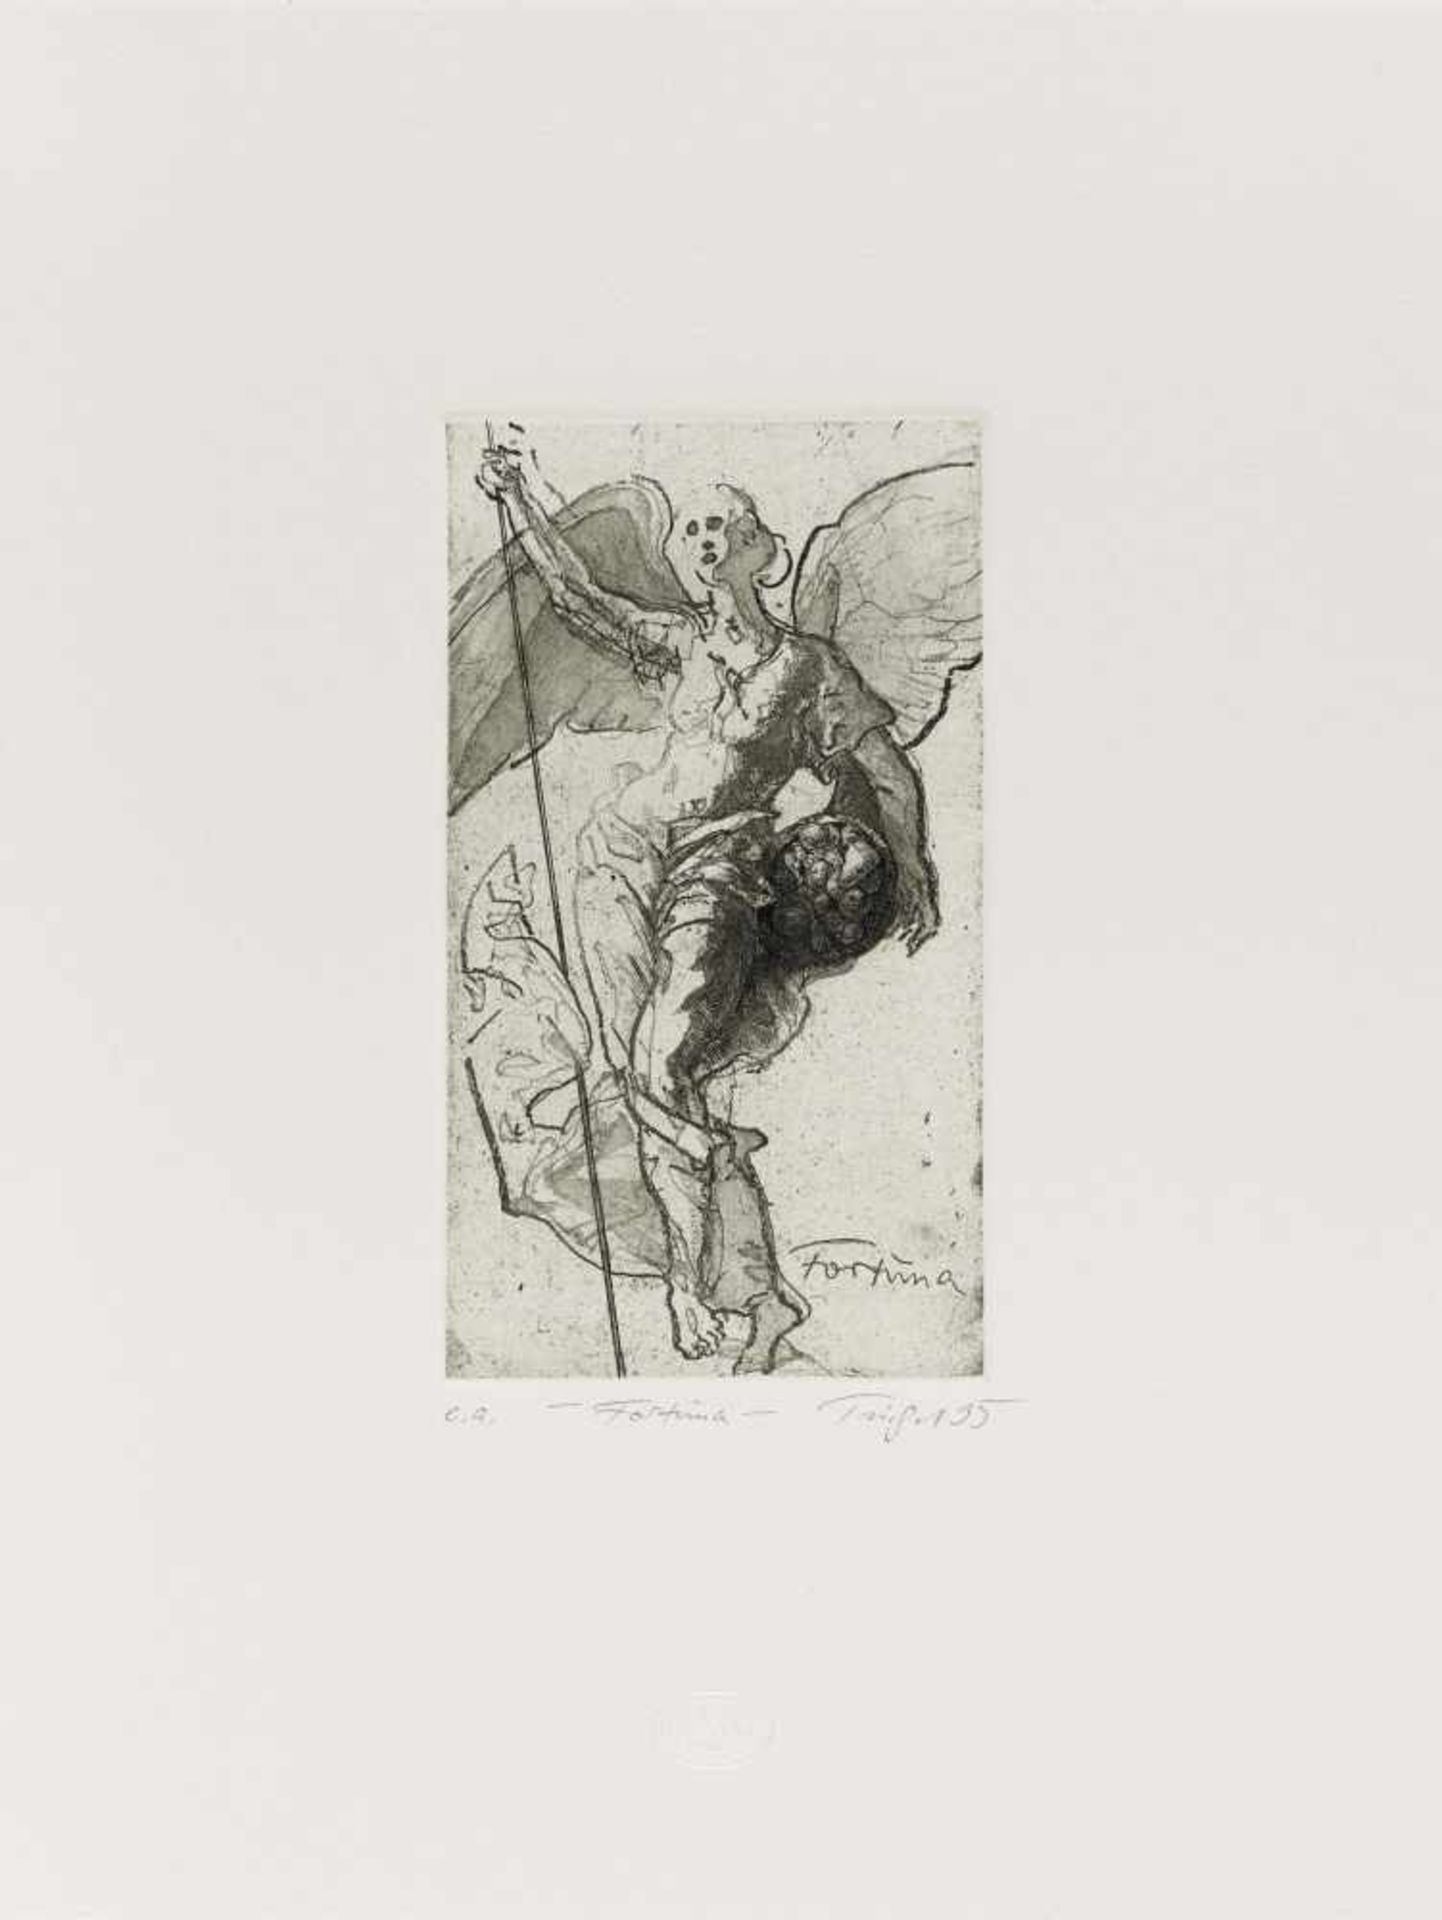 Triegel, Michael1968 Erfurt"Fortuna". 1995. Line etching, aquatint etching and vernis mou on laid